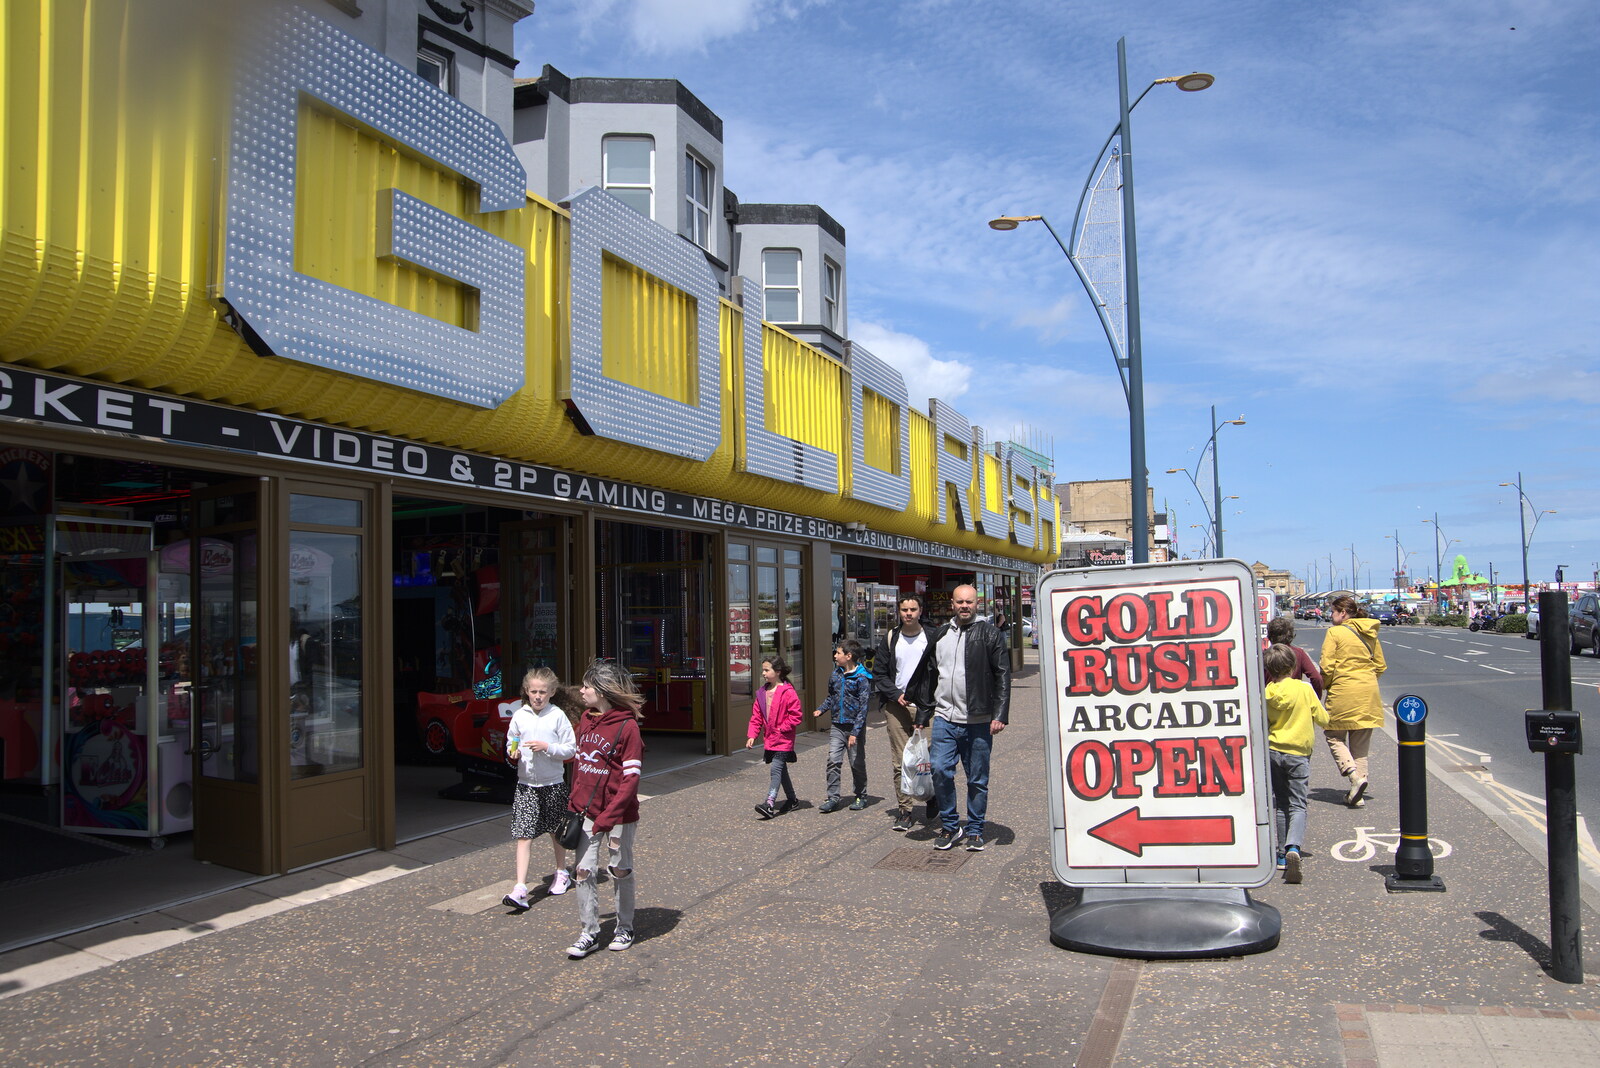 The Goldrush amusement arcade from Faded Seaside Glamour: A Weekend in Great Yarmouth, Norfolk - 29th May 2022